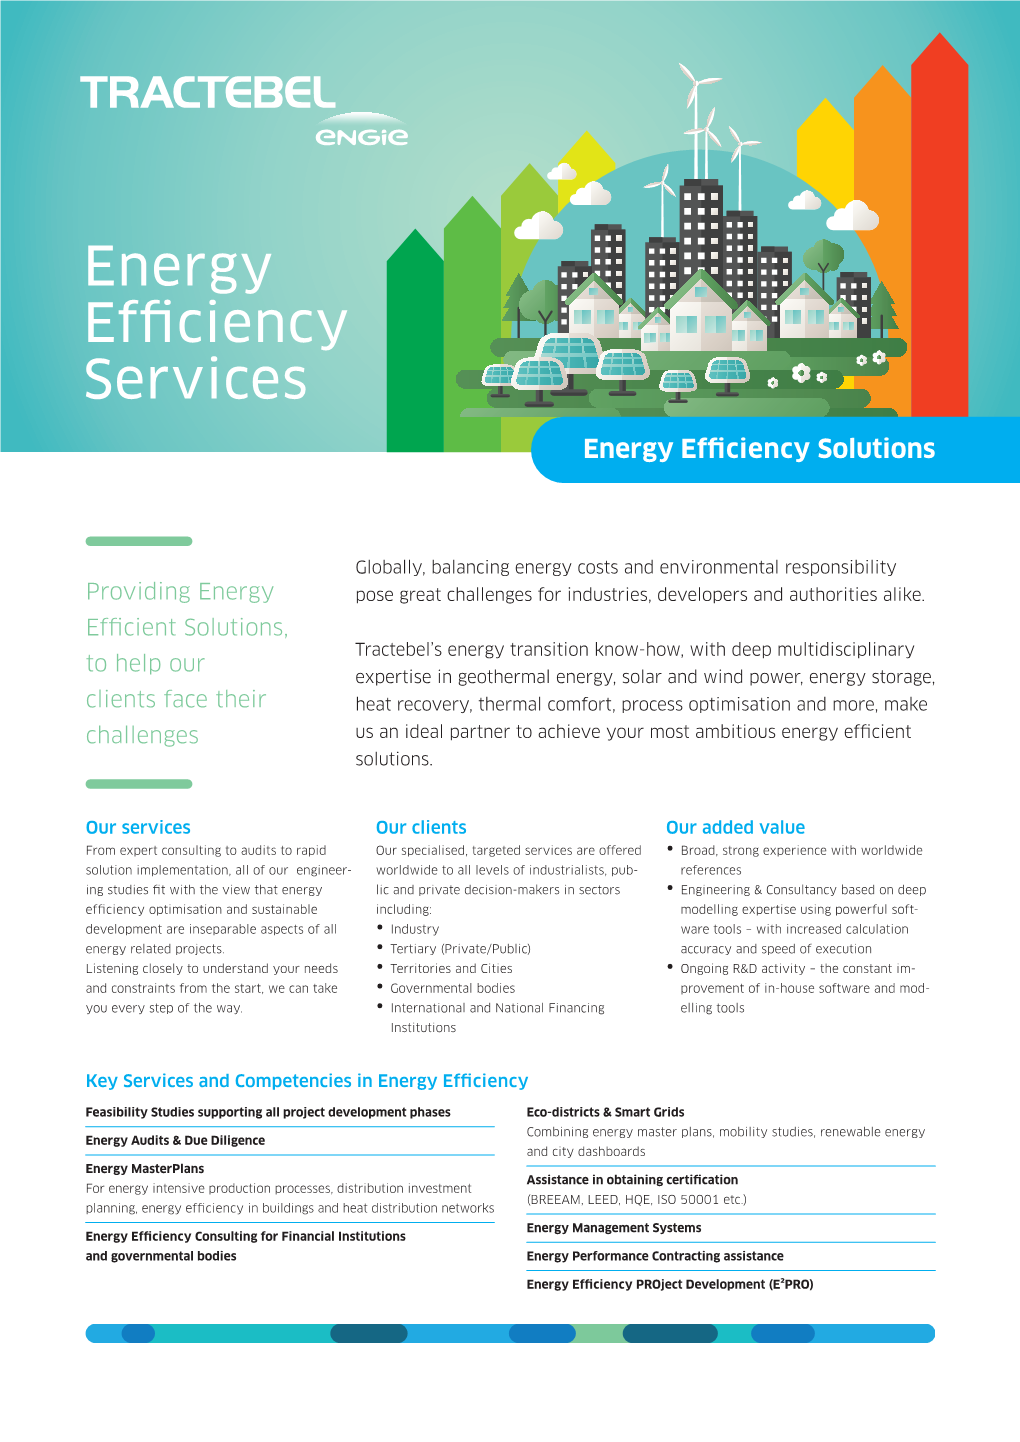 Energy Efficiency Services